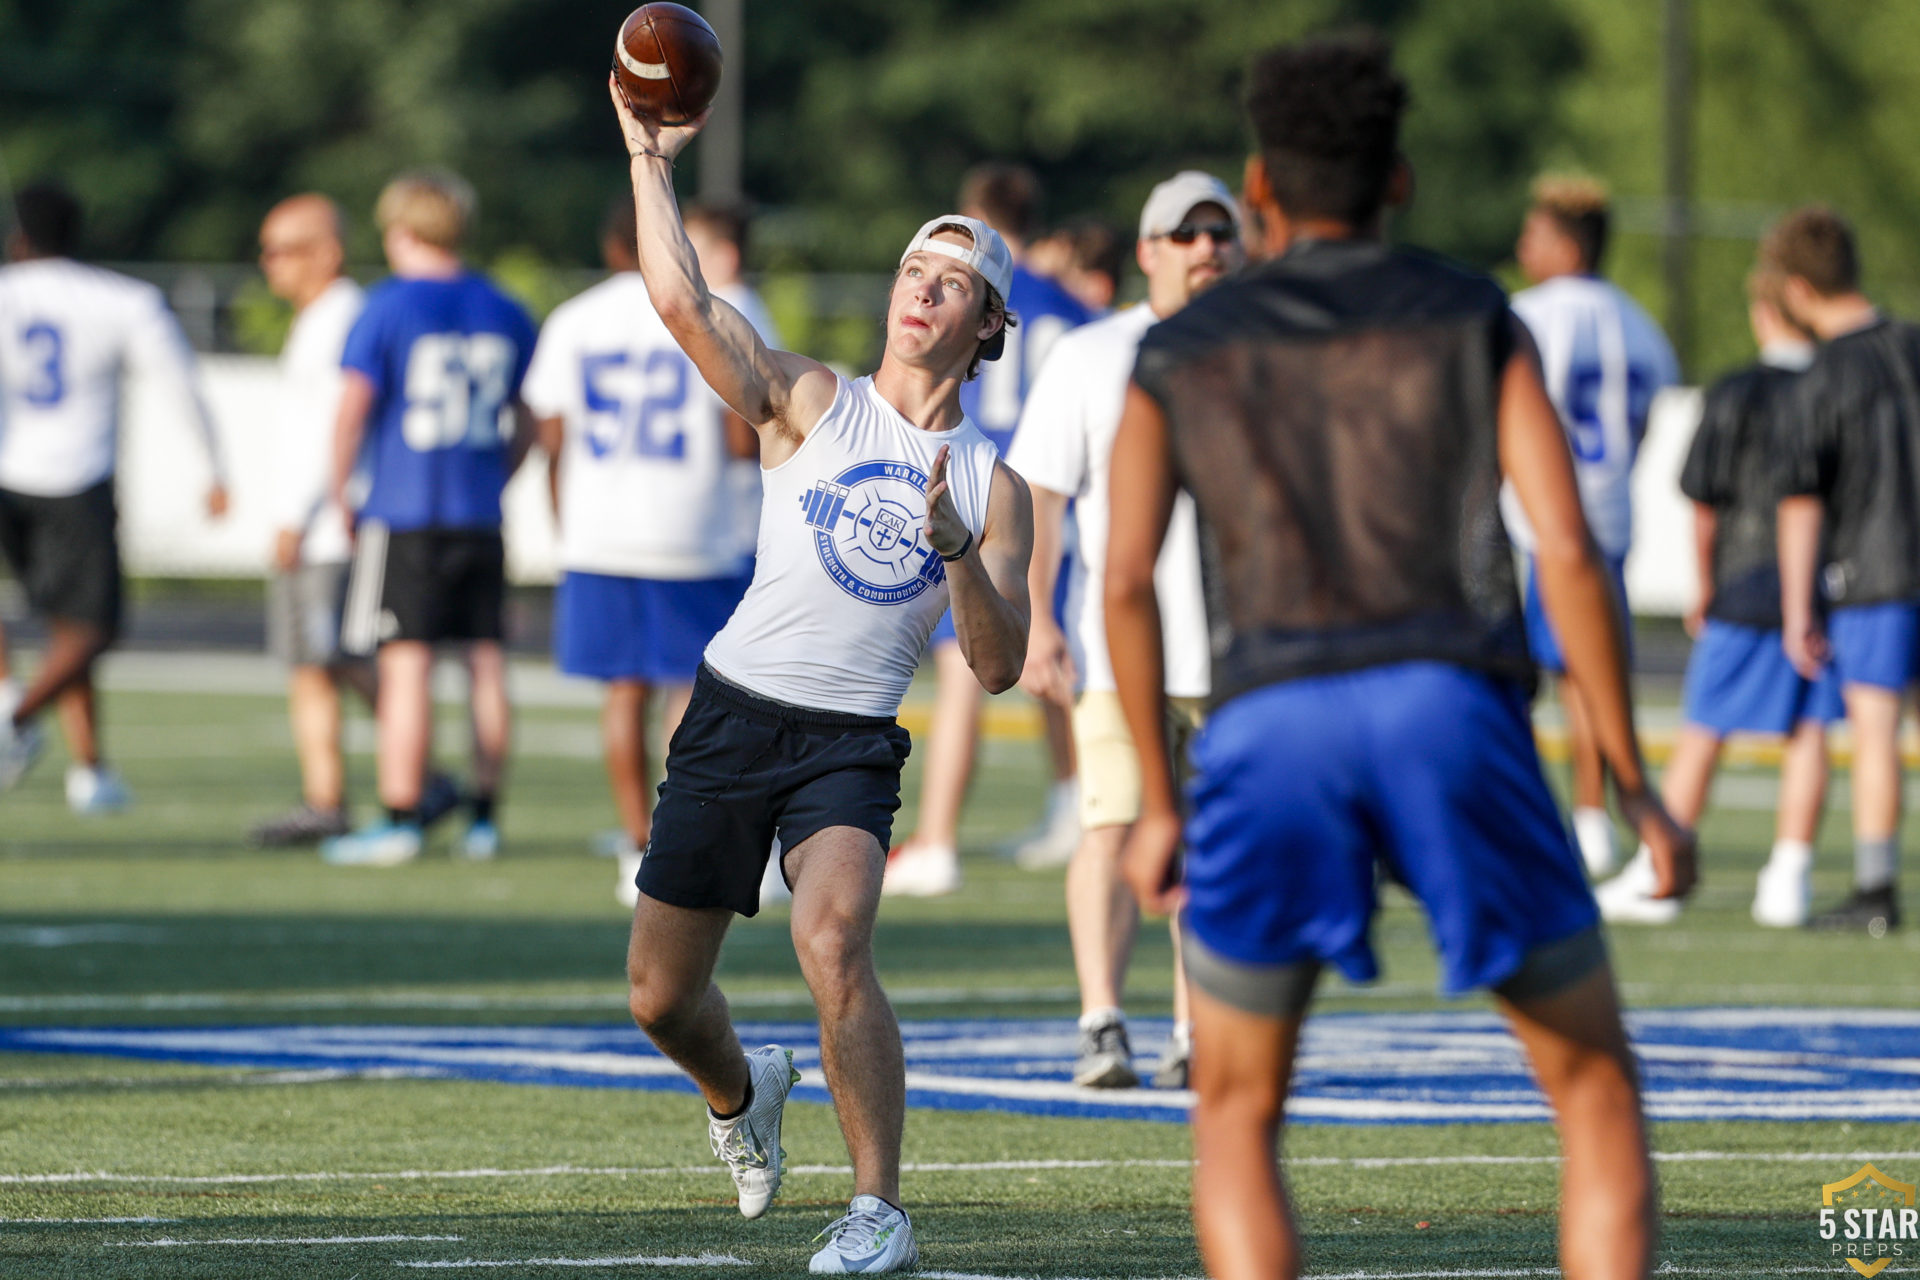 CAK Football approaching 2020 season with quiet confidence Five Star